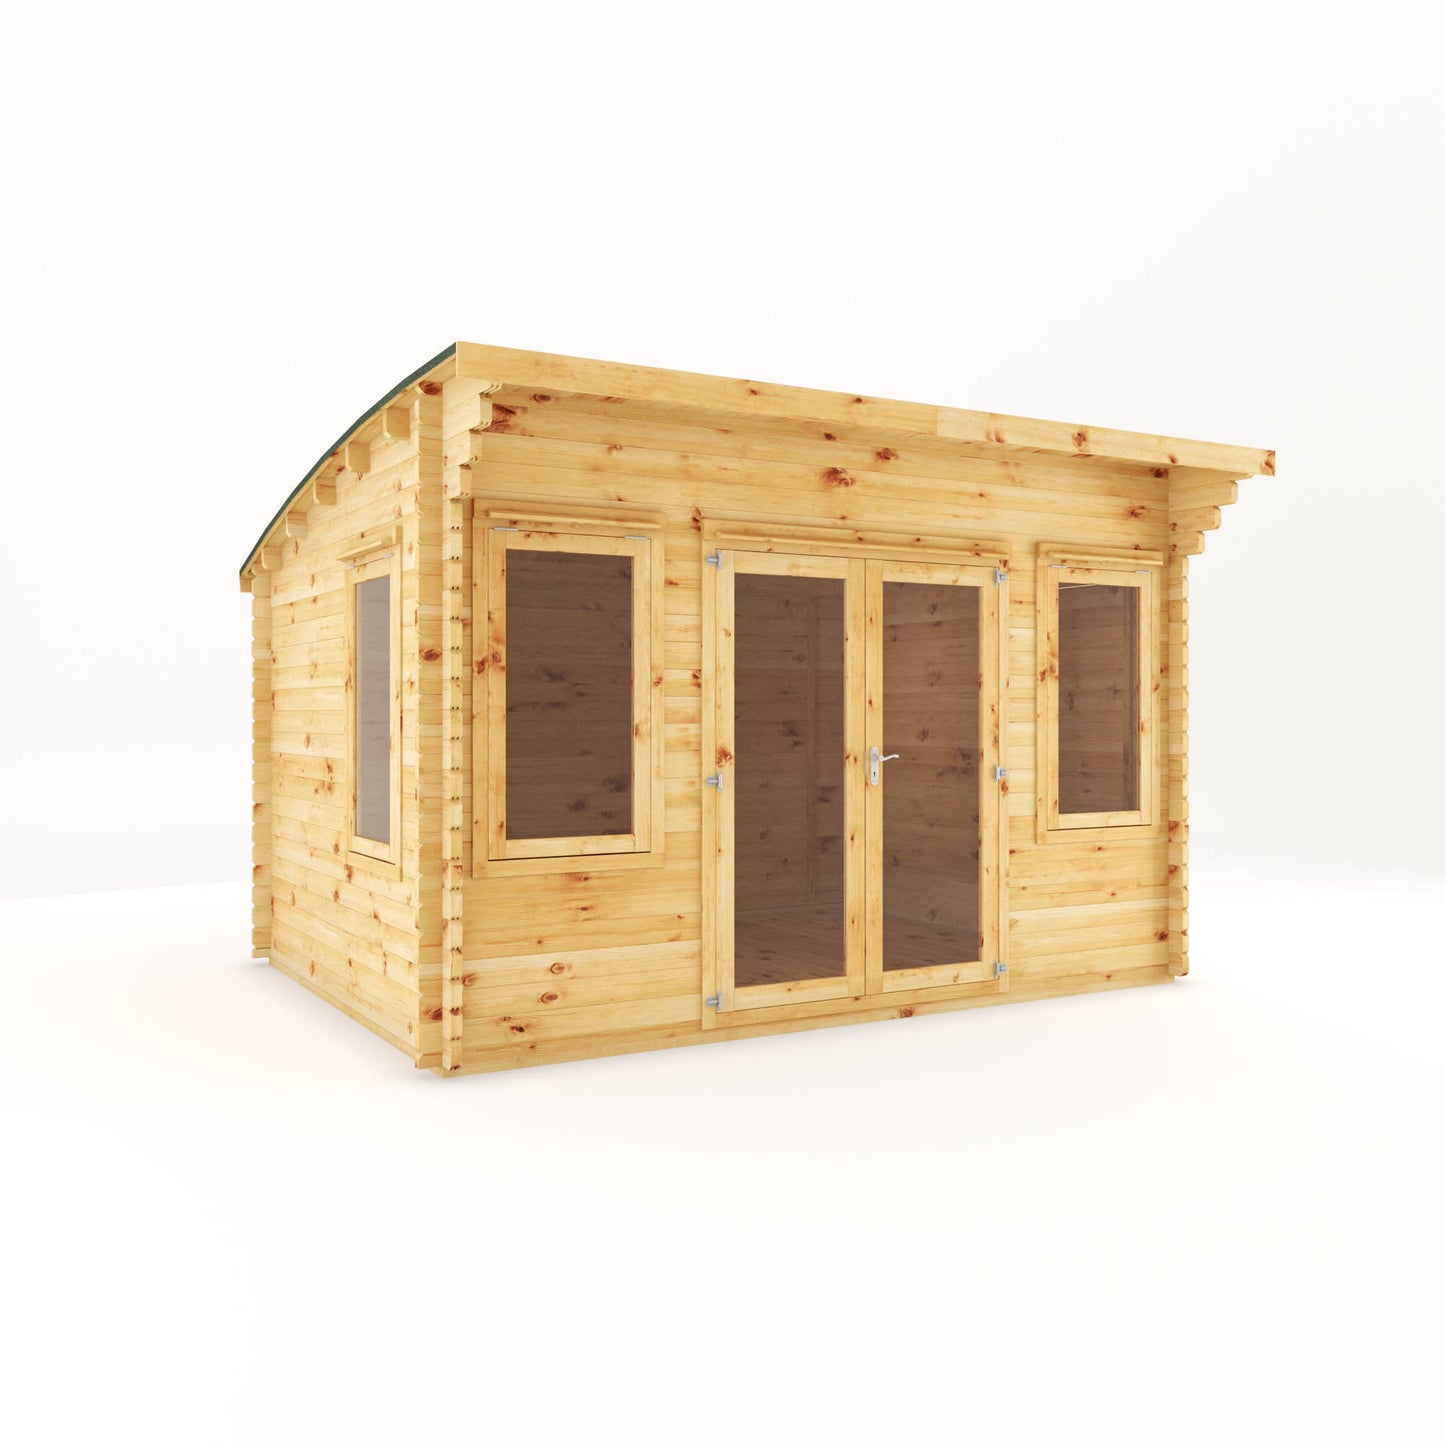 The 4m x 3m Tawny Curved Roof Log Cabin